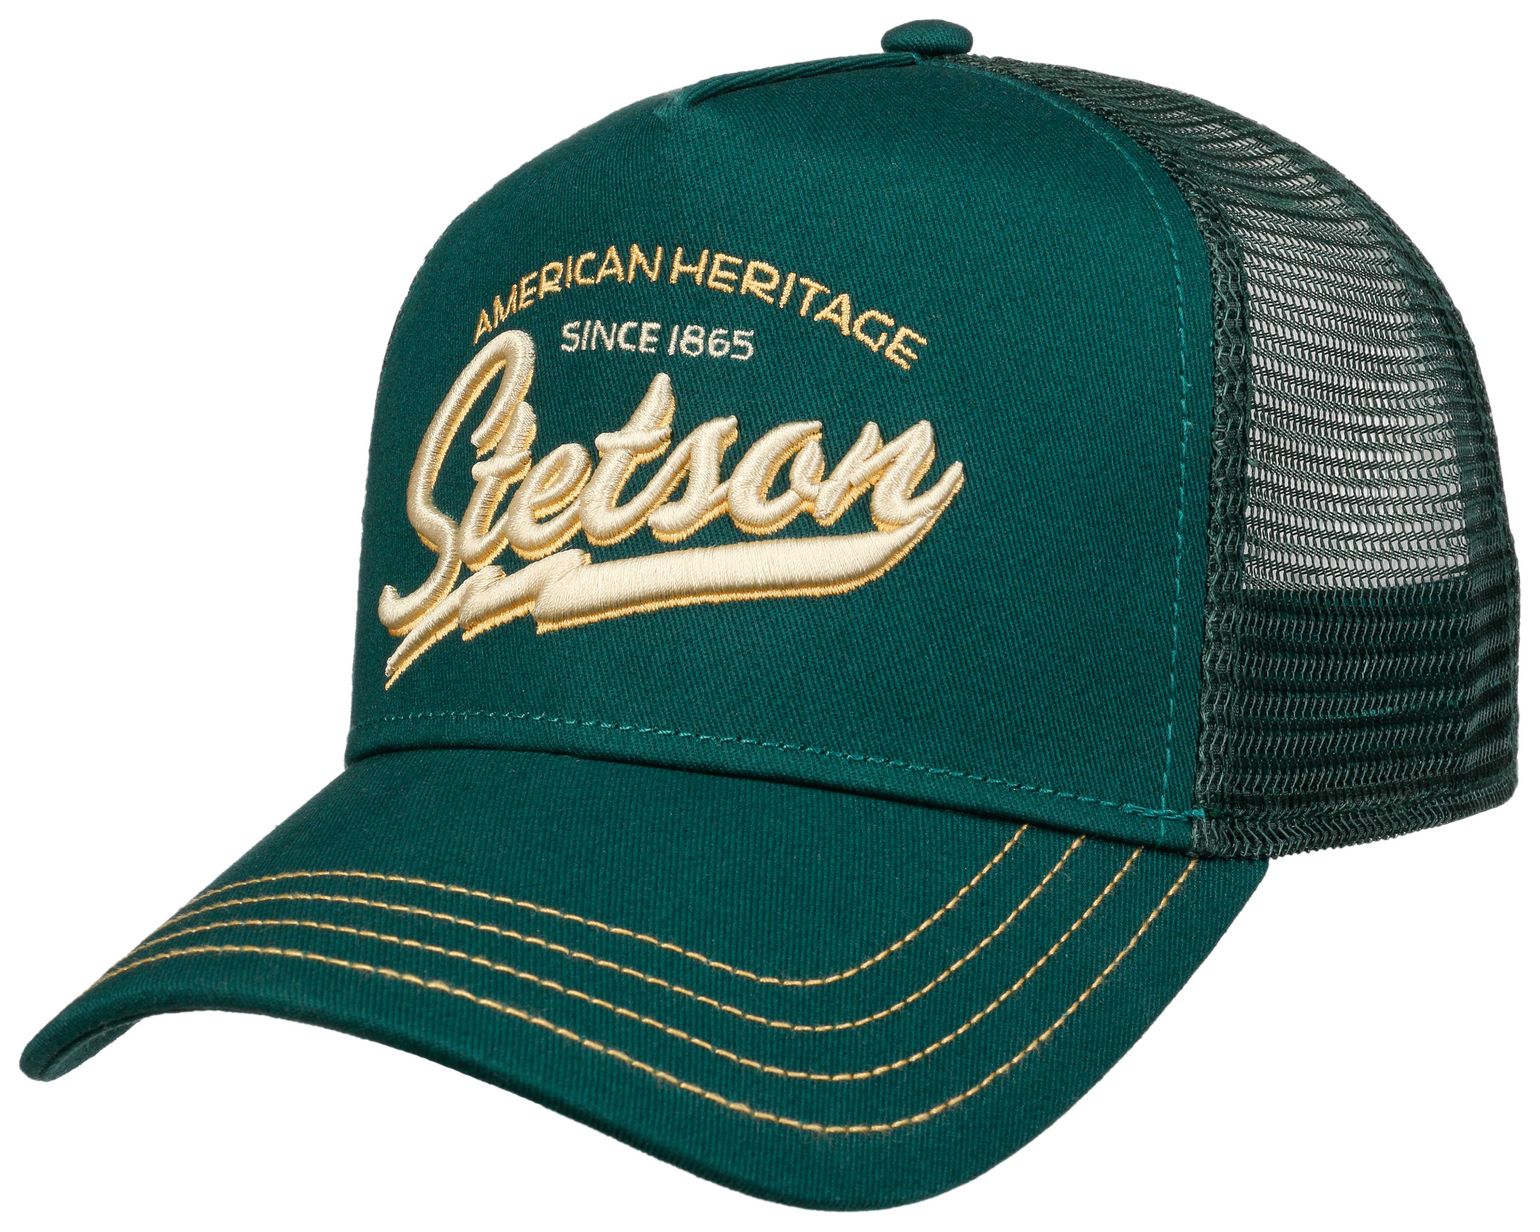 Stetson Trucker Cap American Heritage Classic Washed Green